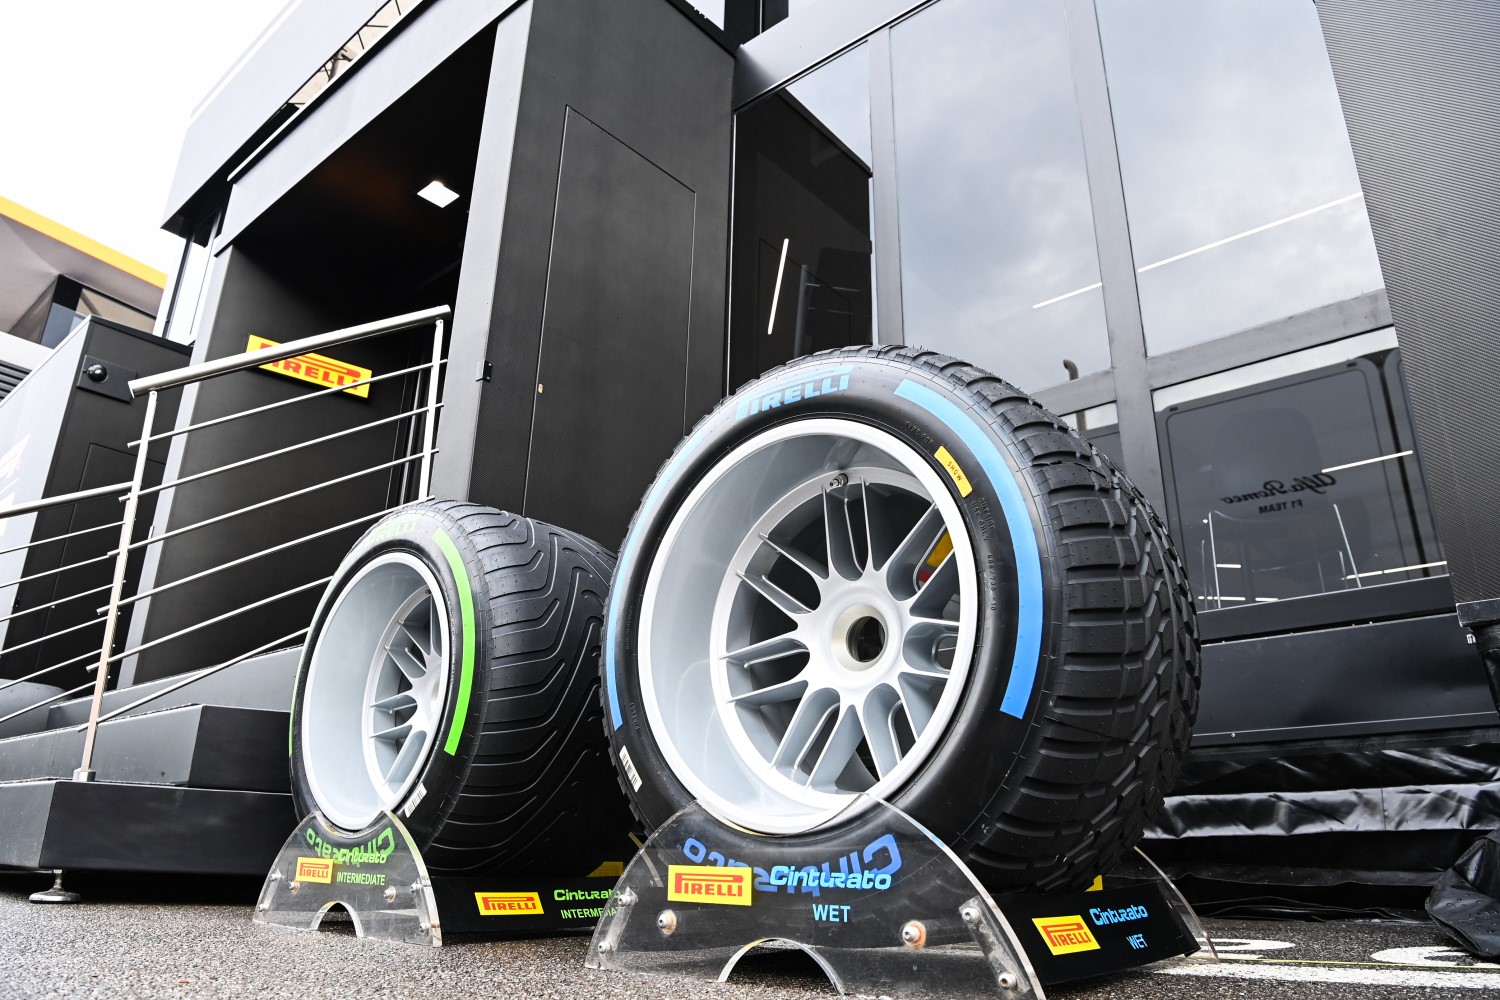 Pirelli Rain Tires outside of the Pirelli motorhome during the Spanish GP  at Circuit de Barcelona-Catalunya on Thursday June 01, 2023 in Barcelona, Spain. (Photo by Mark Sutton / LAT Images)